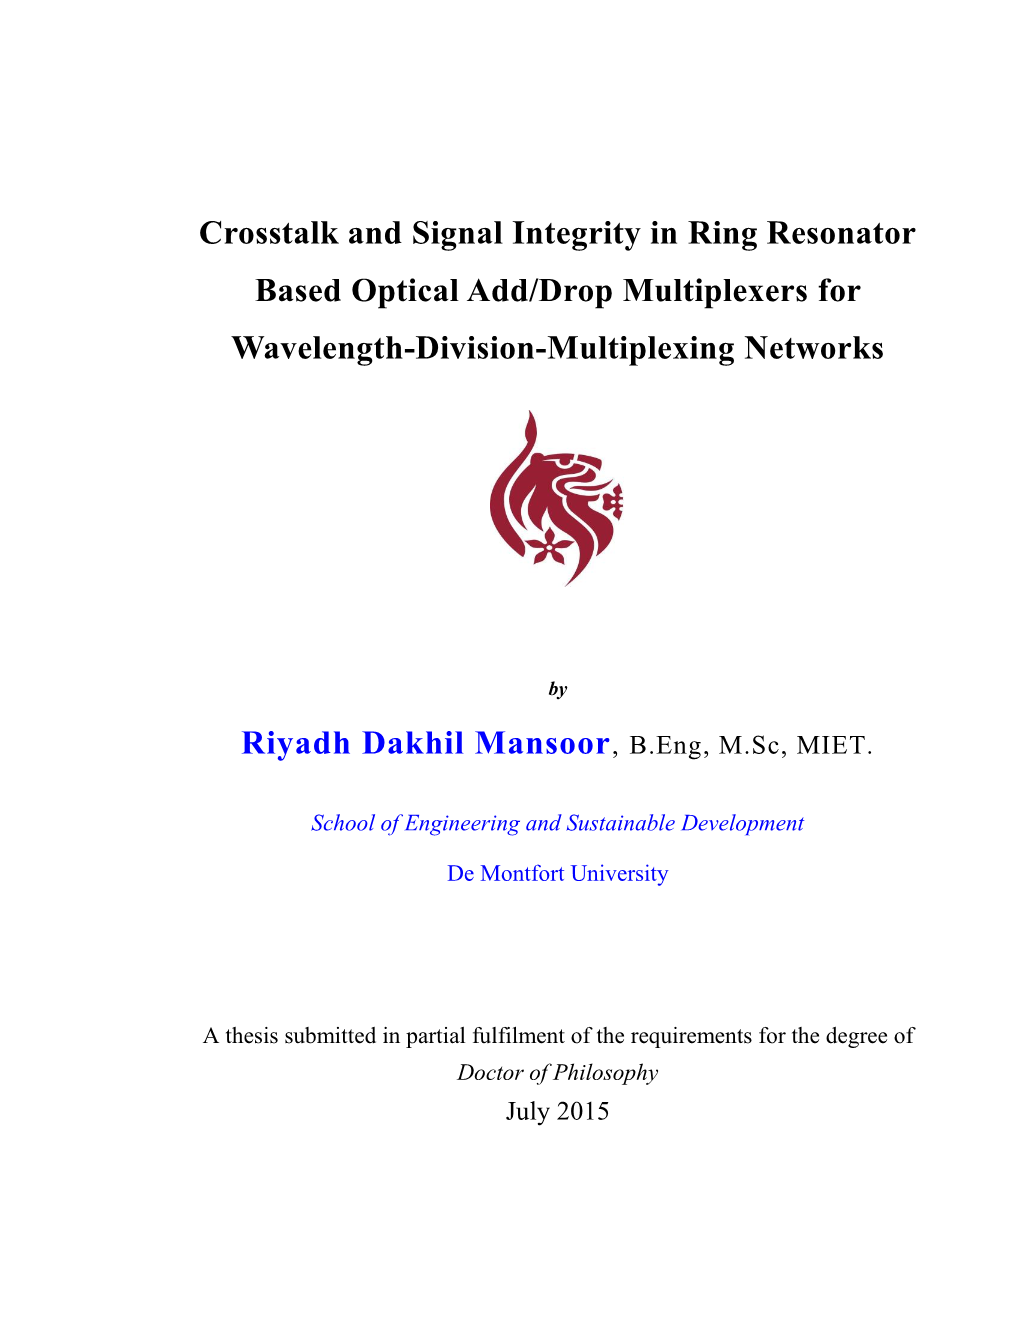 Crosstalk and Signal Integrity in Ring Resonator Based Optical Add/Drop Multiplexers for Wavelength-Division-Multiplexing Networks